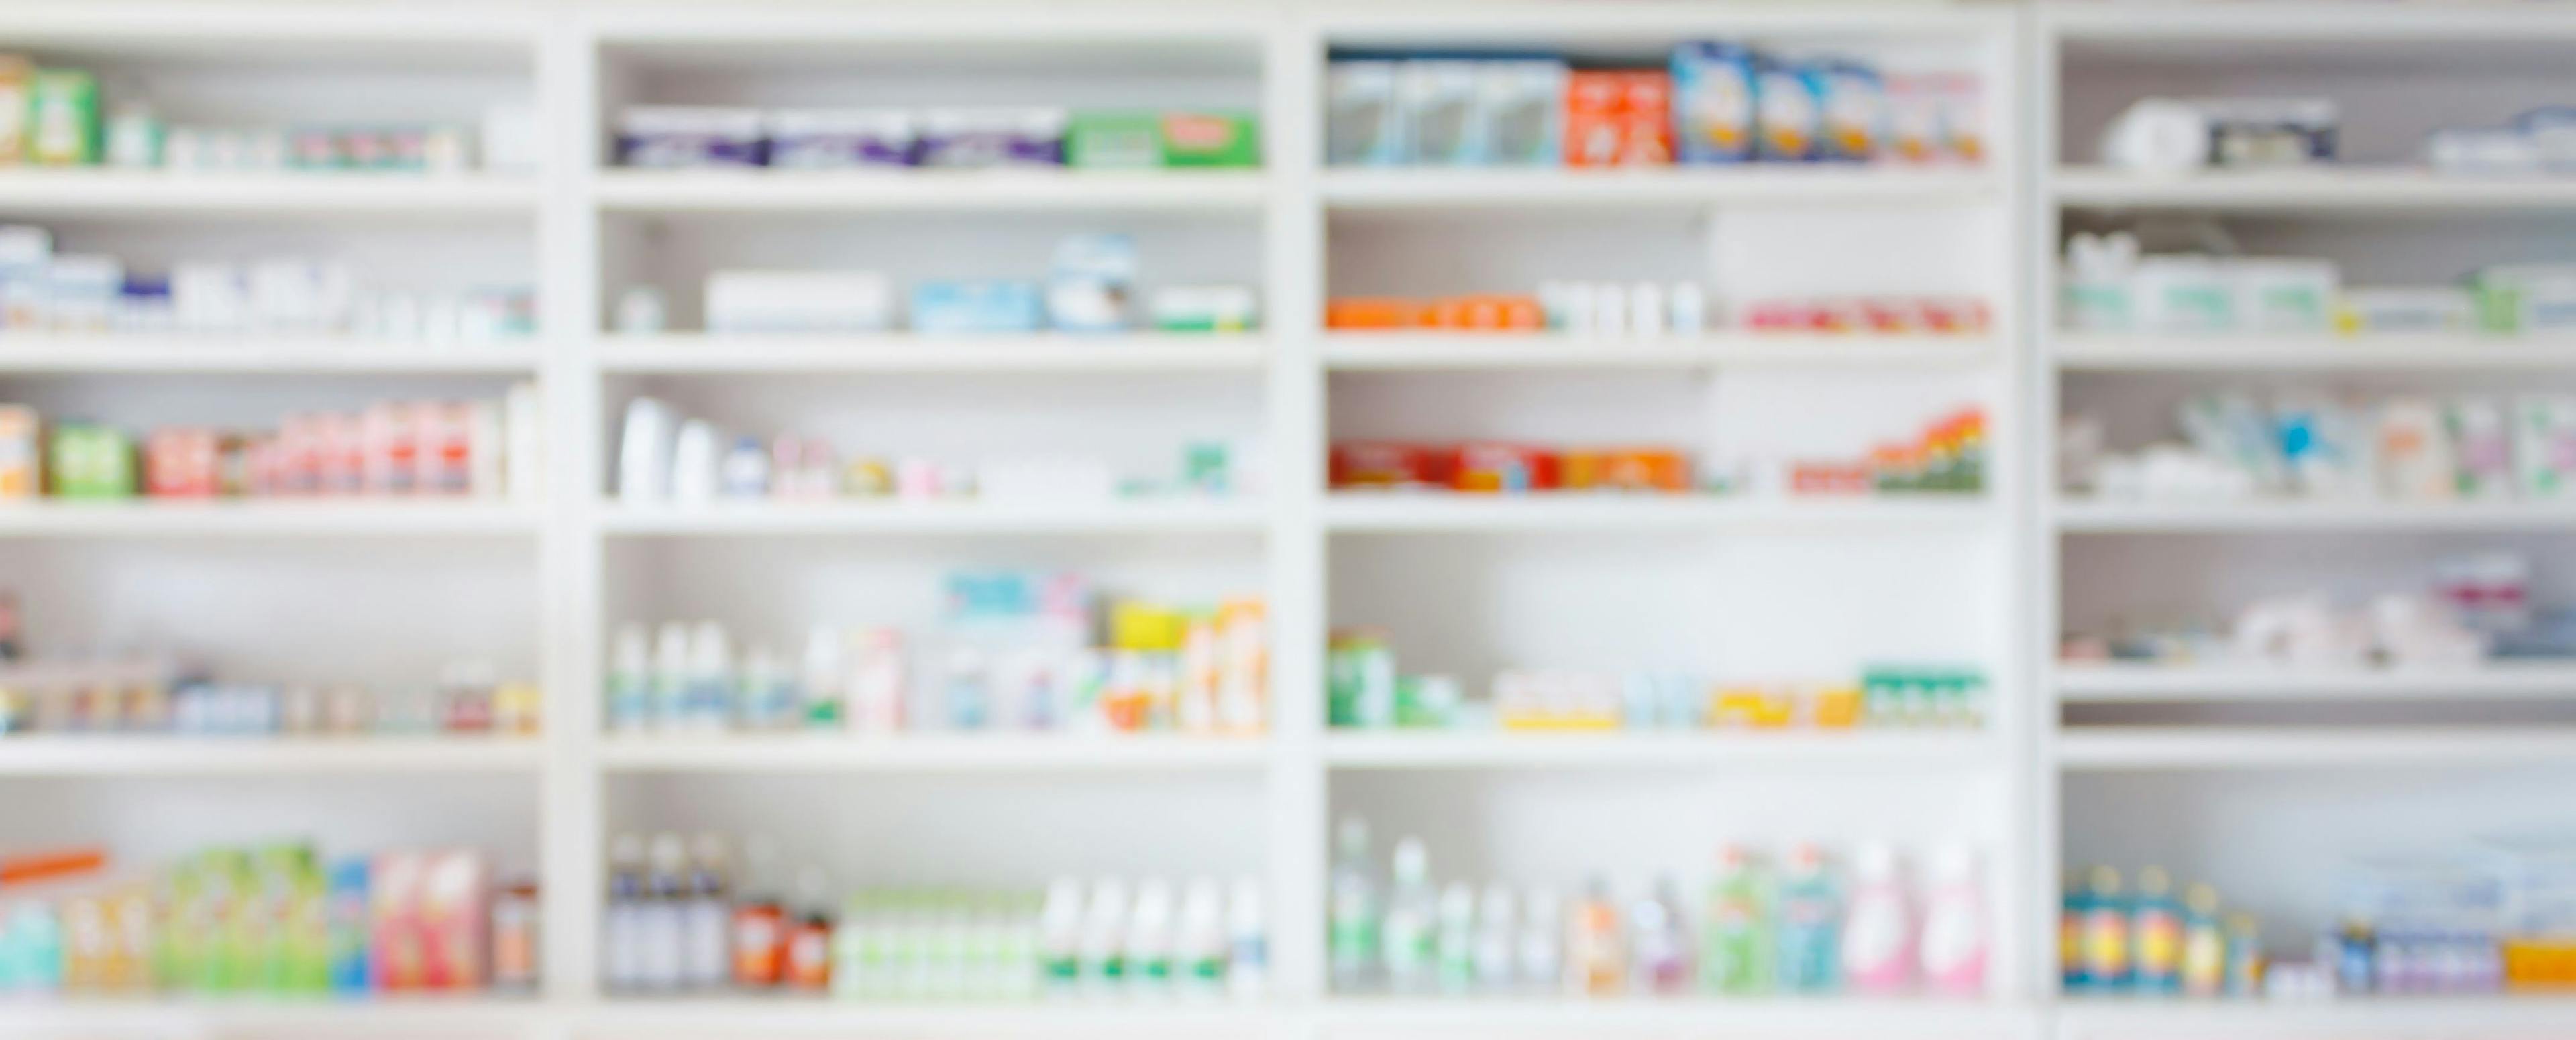 Pharmacy drugstore blur abstract backbround with medicine and healthcare product on shelves | Image credit: Piman Khrutmuang - stock.adobe.com